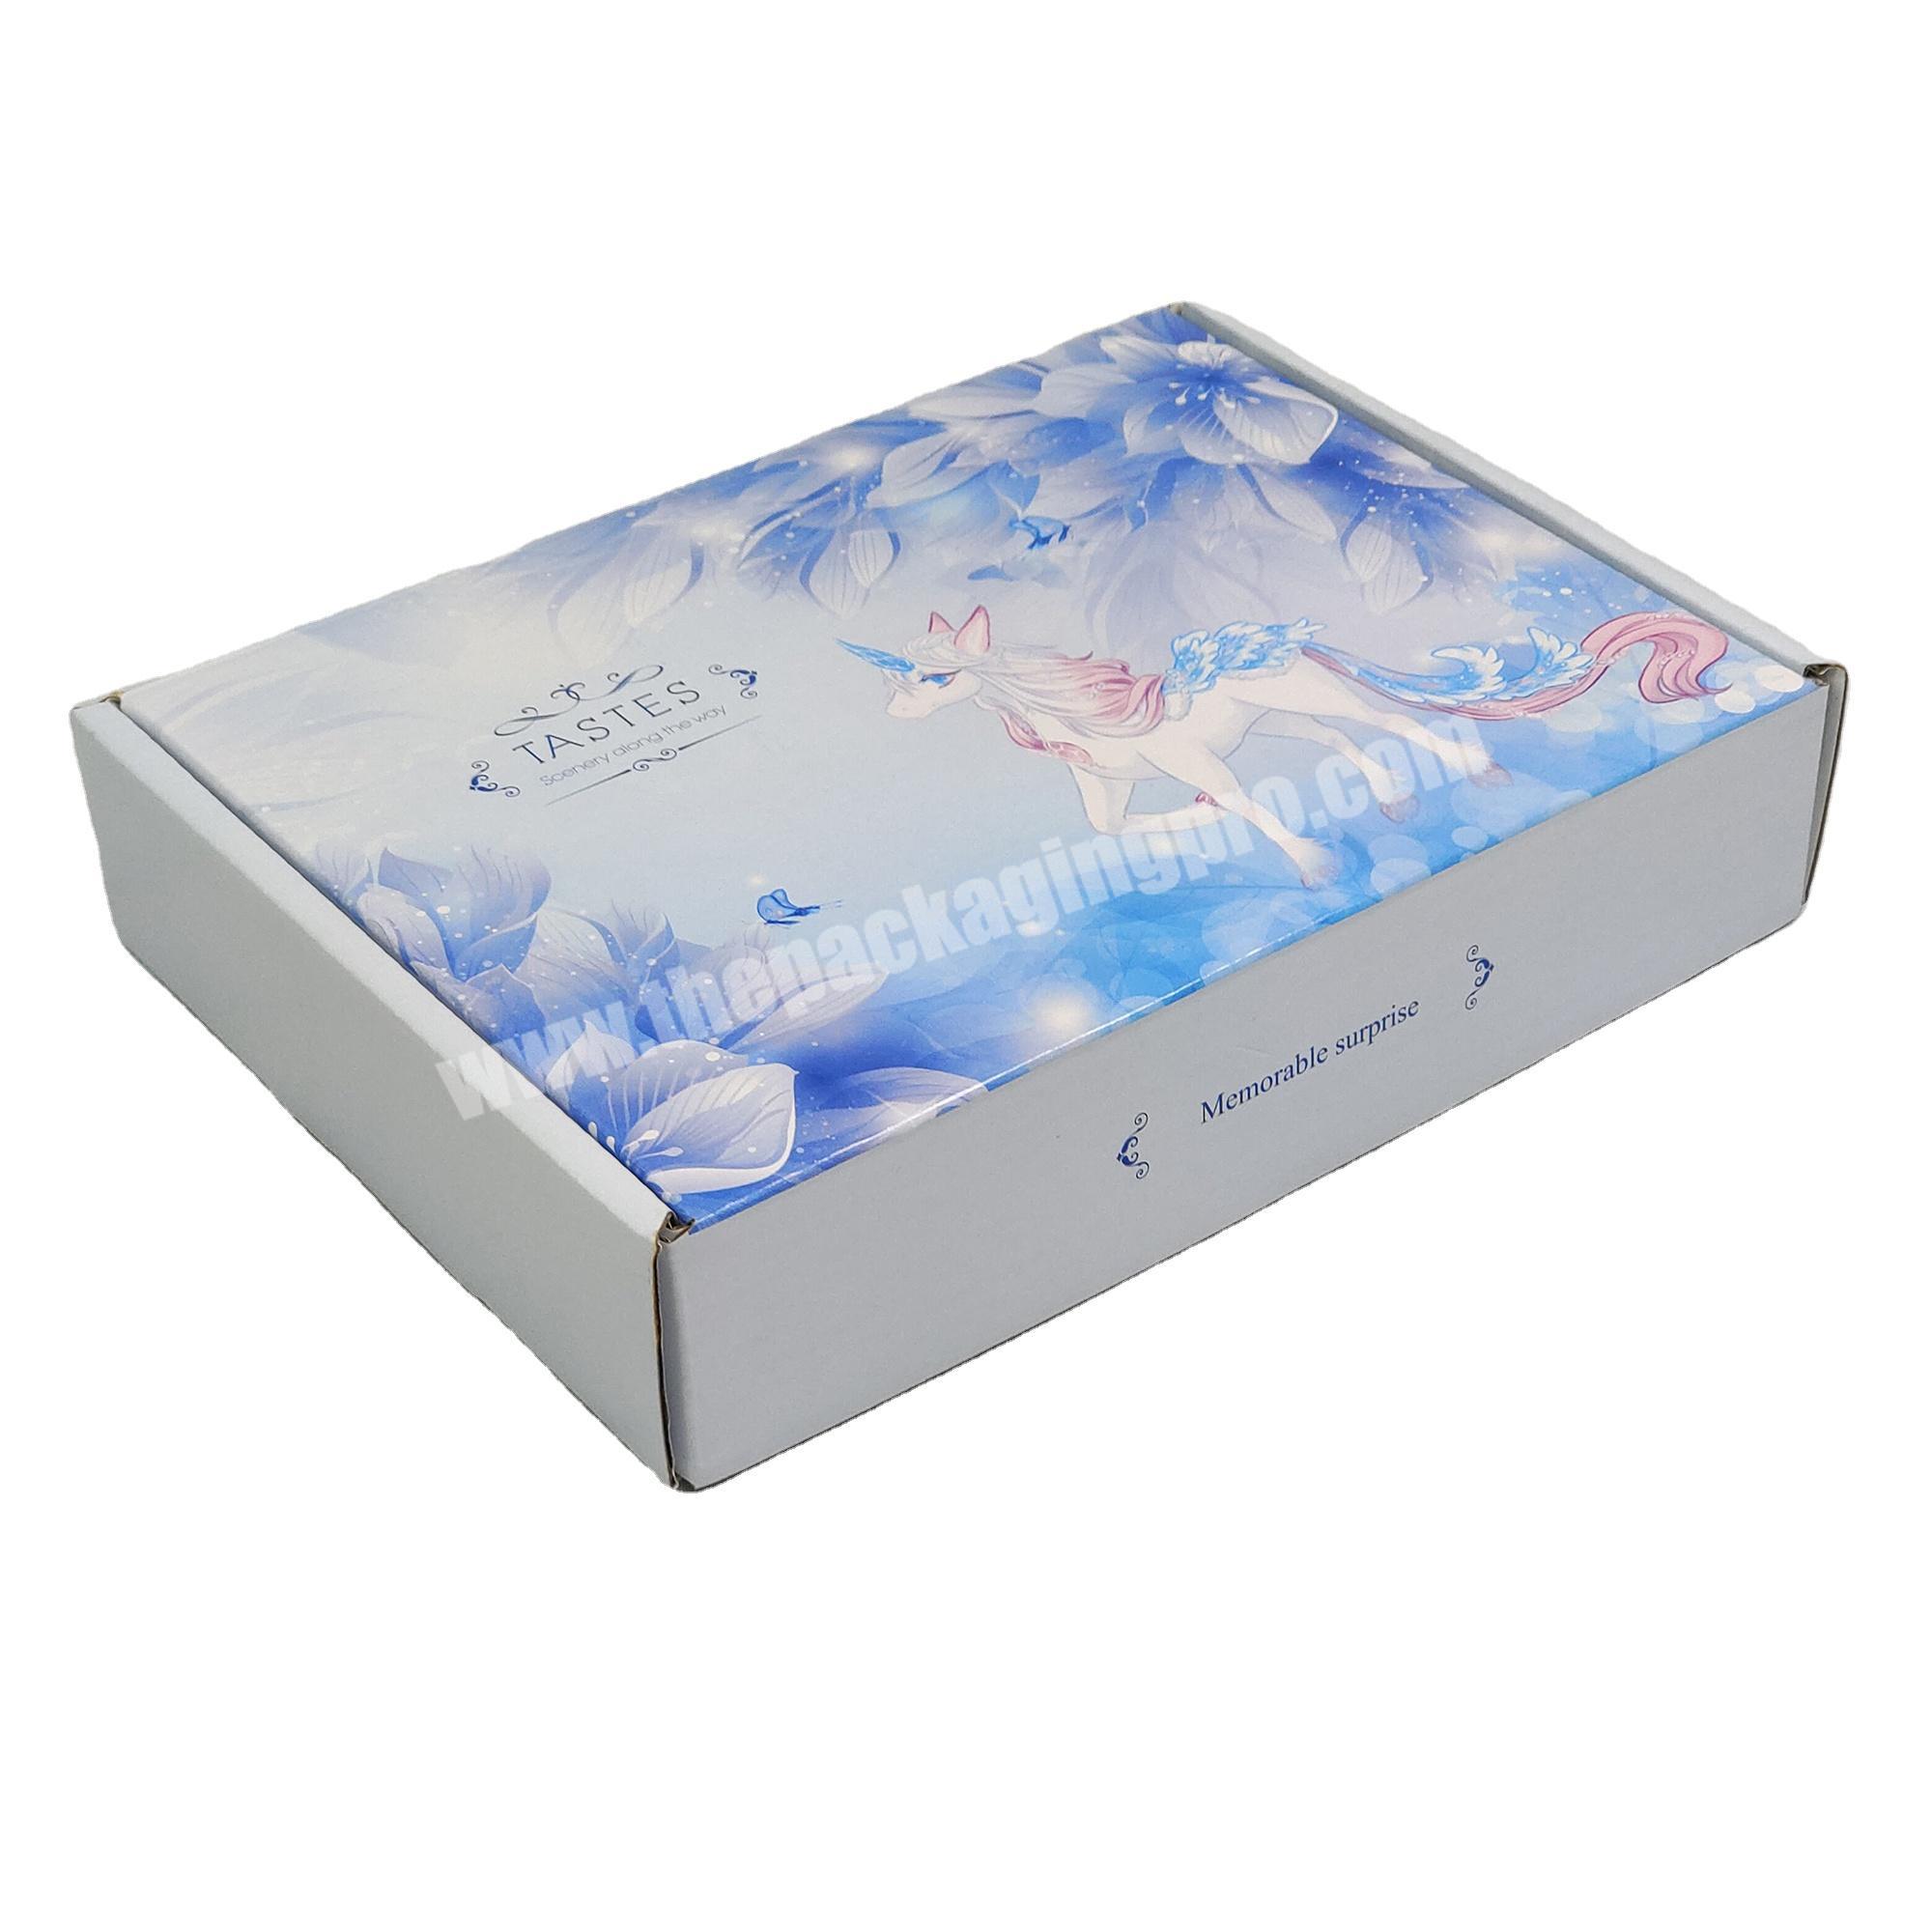 2022 Recyclable custom printed beautifully simple gift boxes